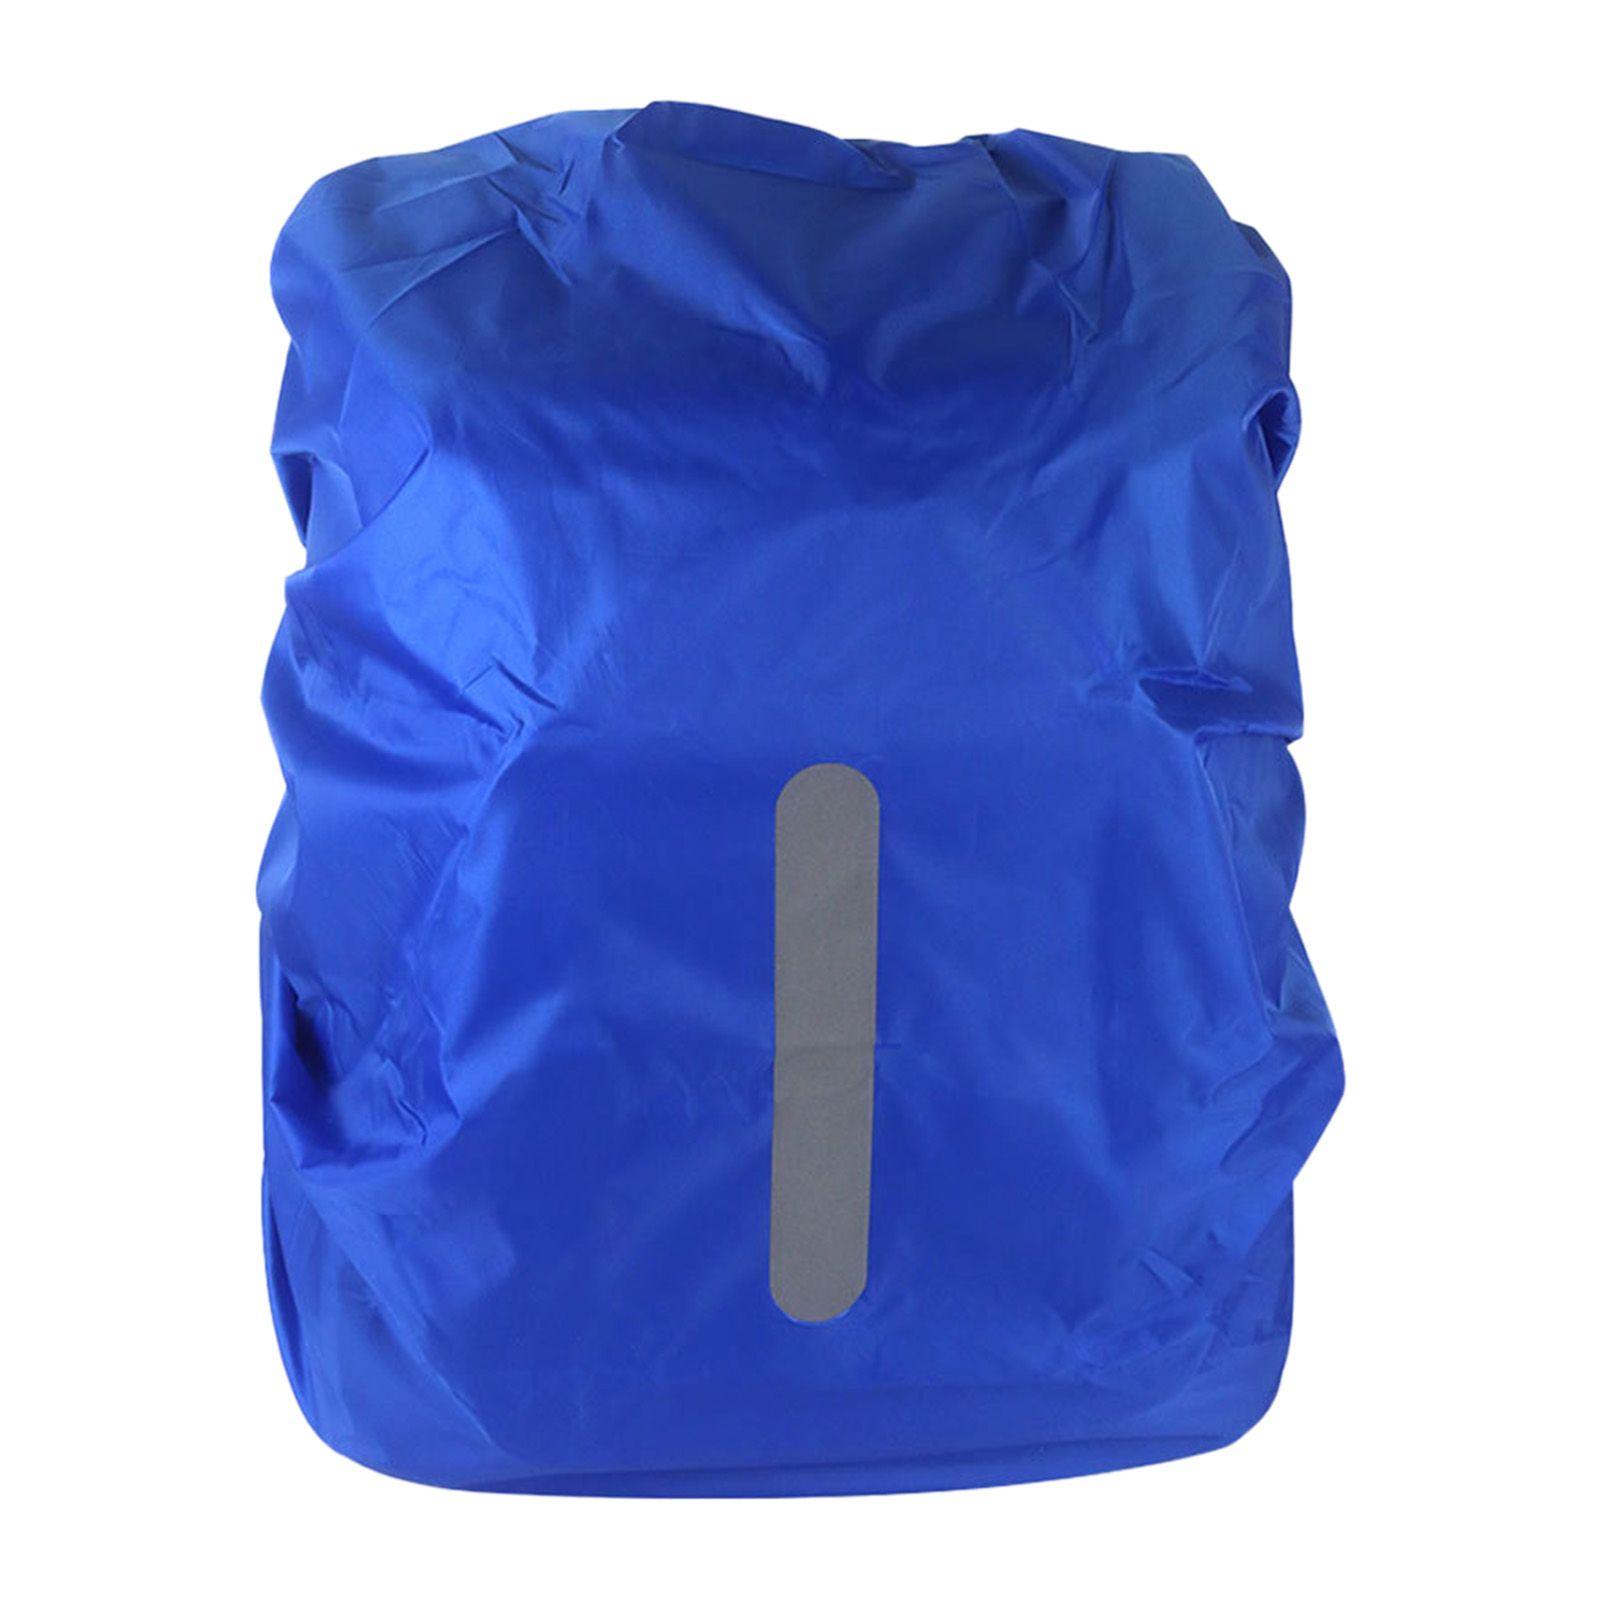 Waterproof Backpack Rain Cover Backpack Reflective Rucksack Rain Cover For Bicycling Hiking Camping Traveling Outdoor Activities